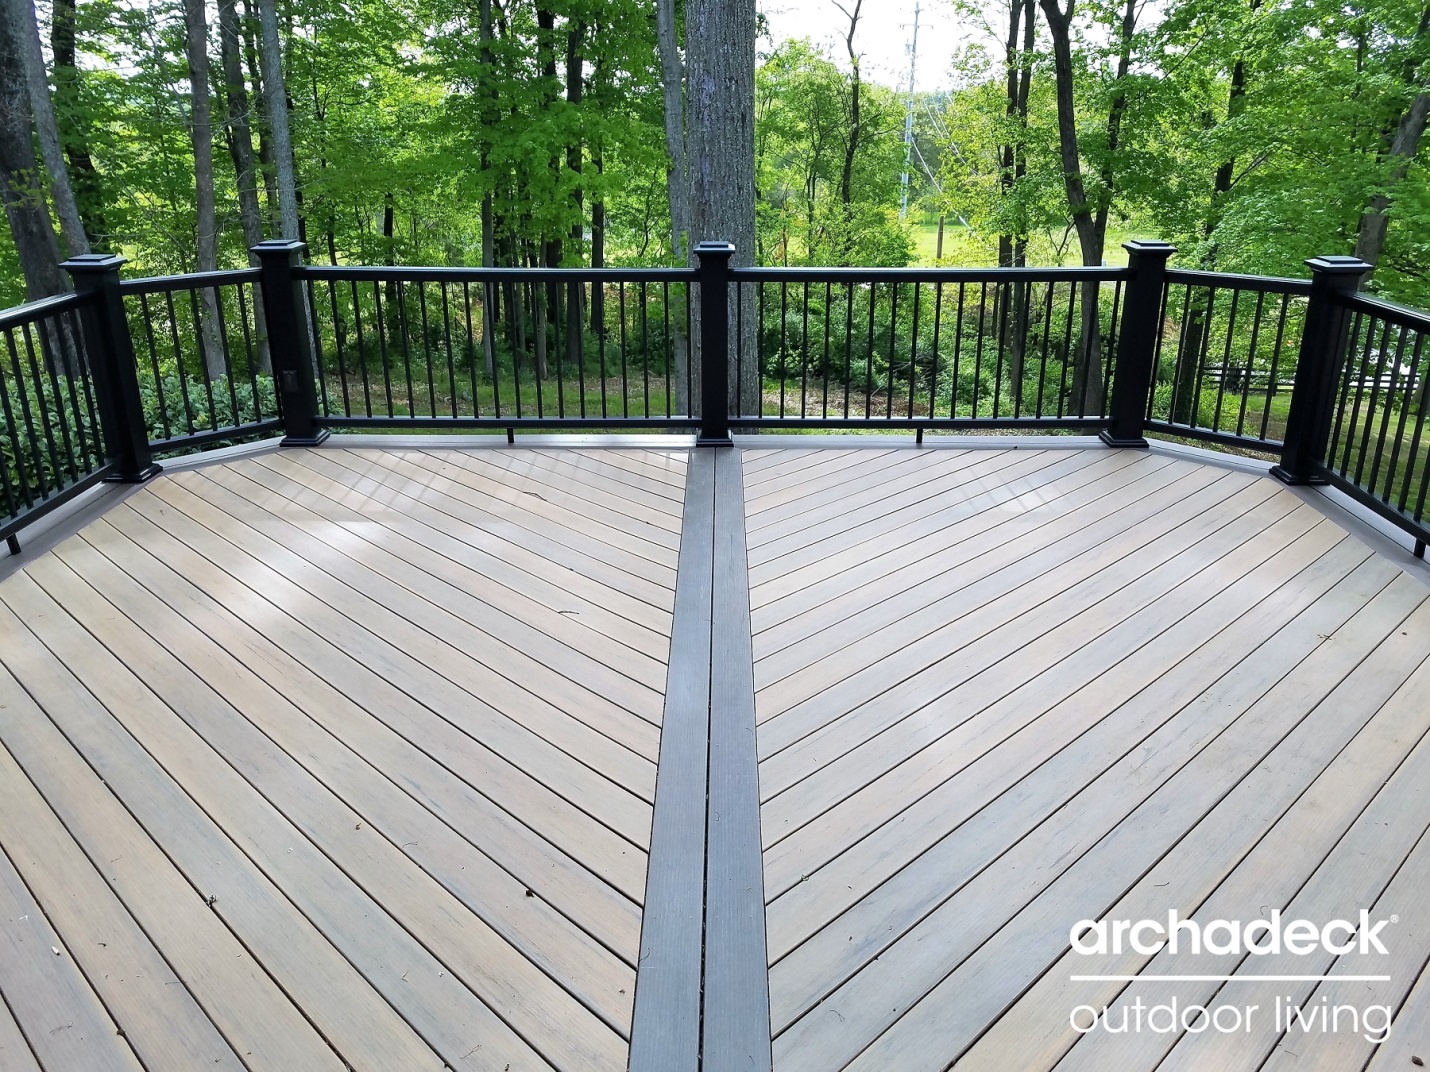 Deck with black railing and trees in the background